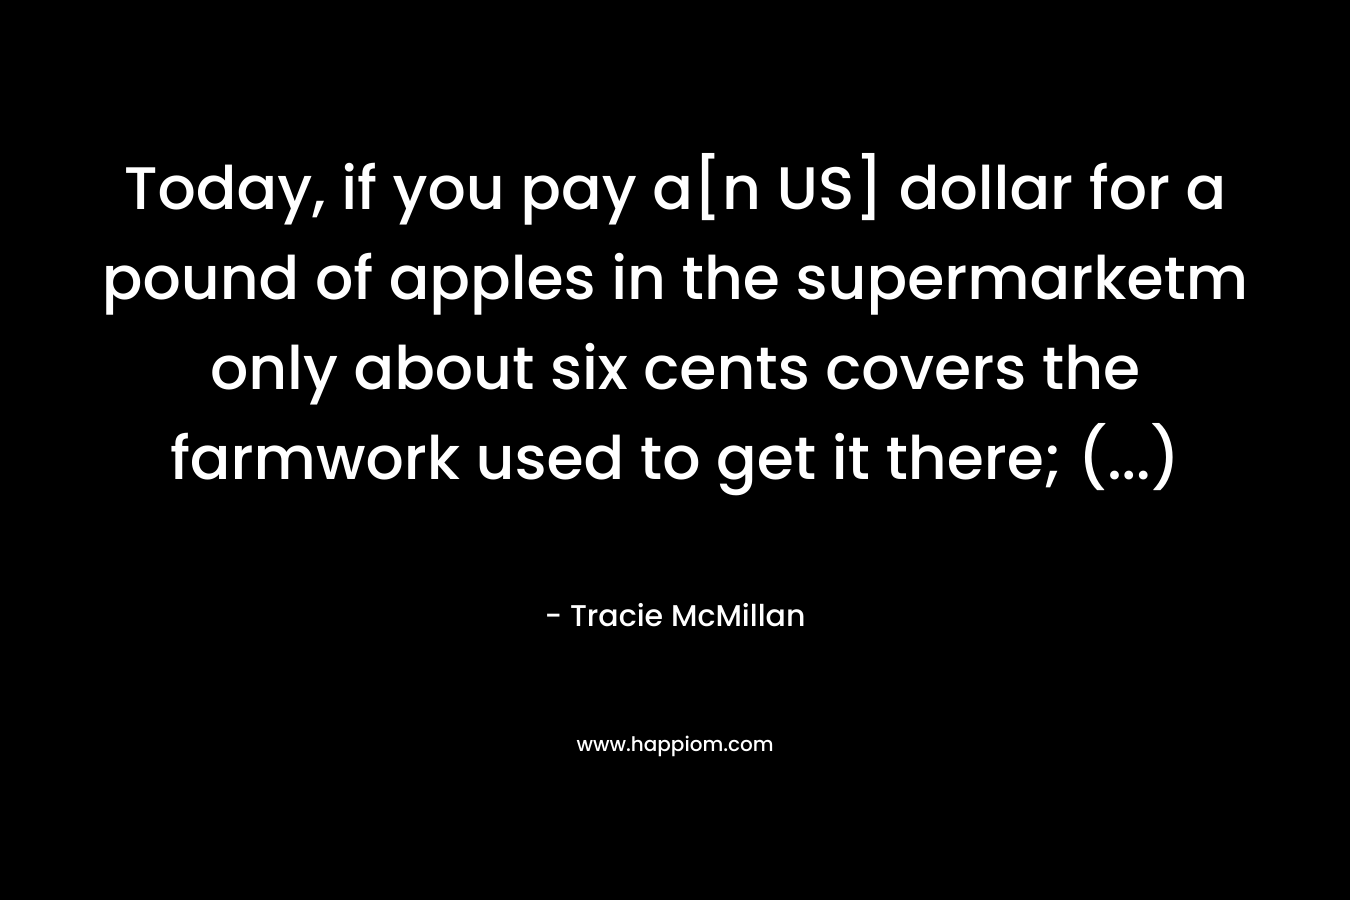 Today, if you pay a[n US] dollar for a pound of apples in the supermarketm only about six cents covers the farmwork used to get it there; (...)